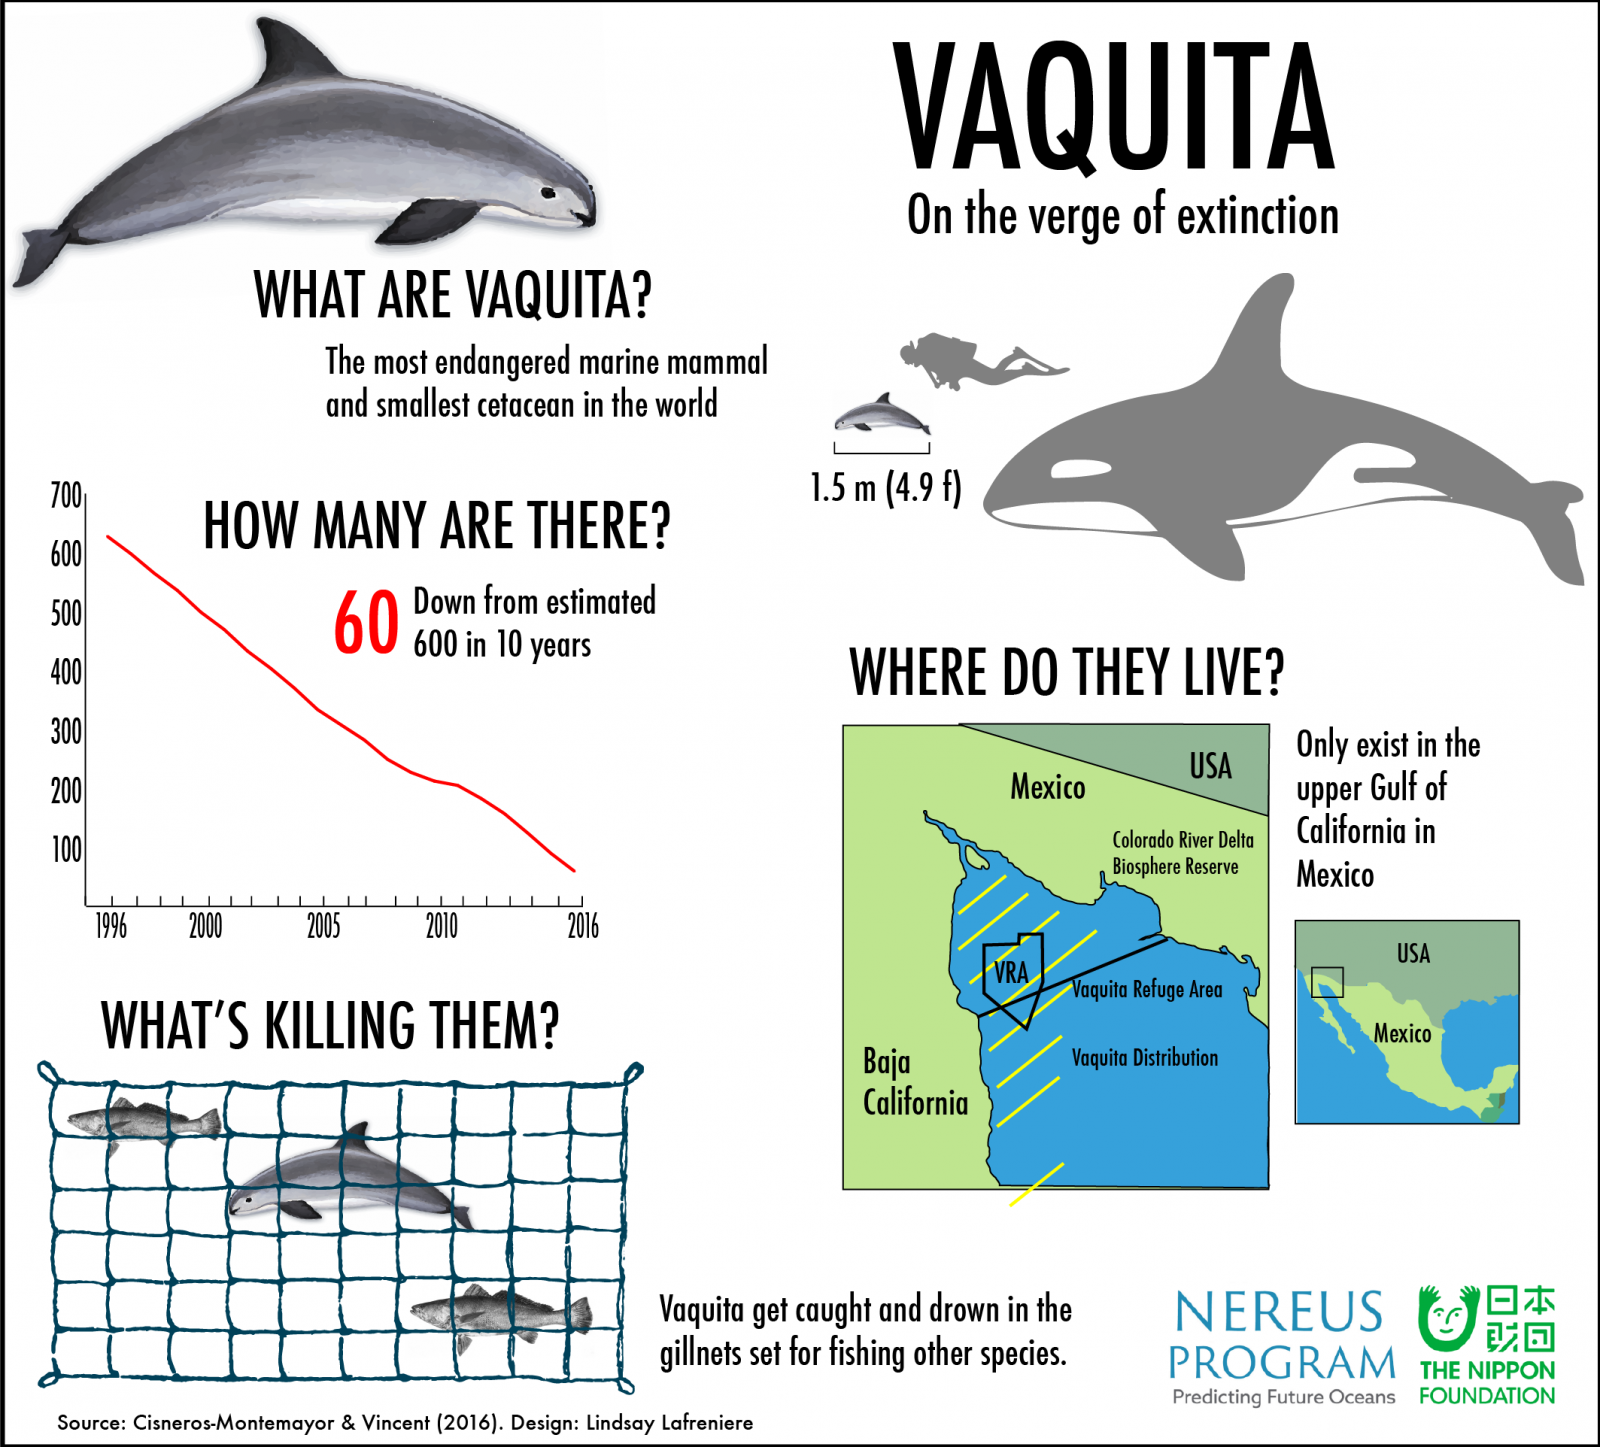 The impending extinction of the vaquita is not just a fishing problem